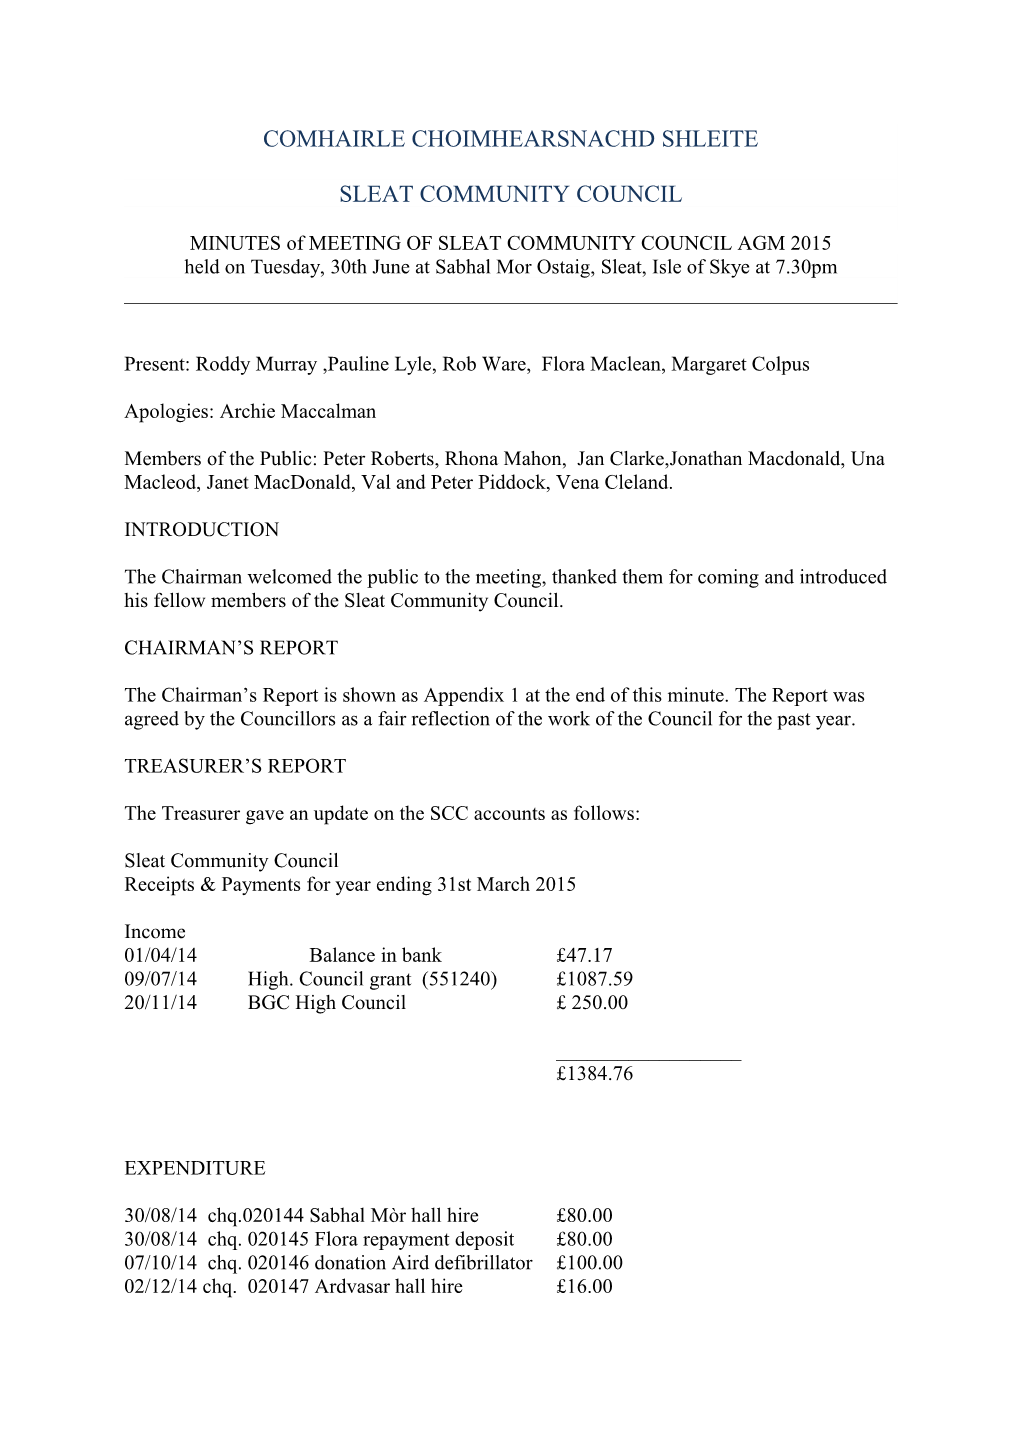 MINUTES of MEETING of SLEAT COMMUNITY COUNCIL AGM 2015